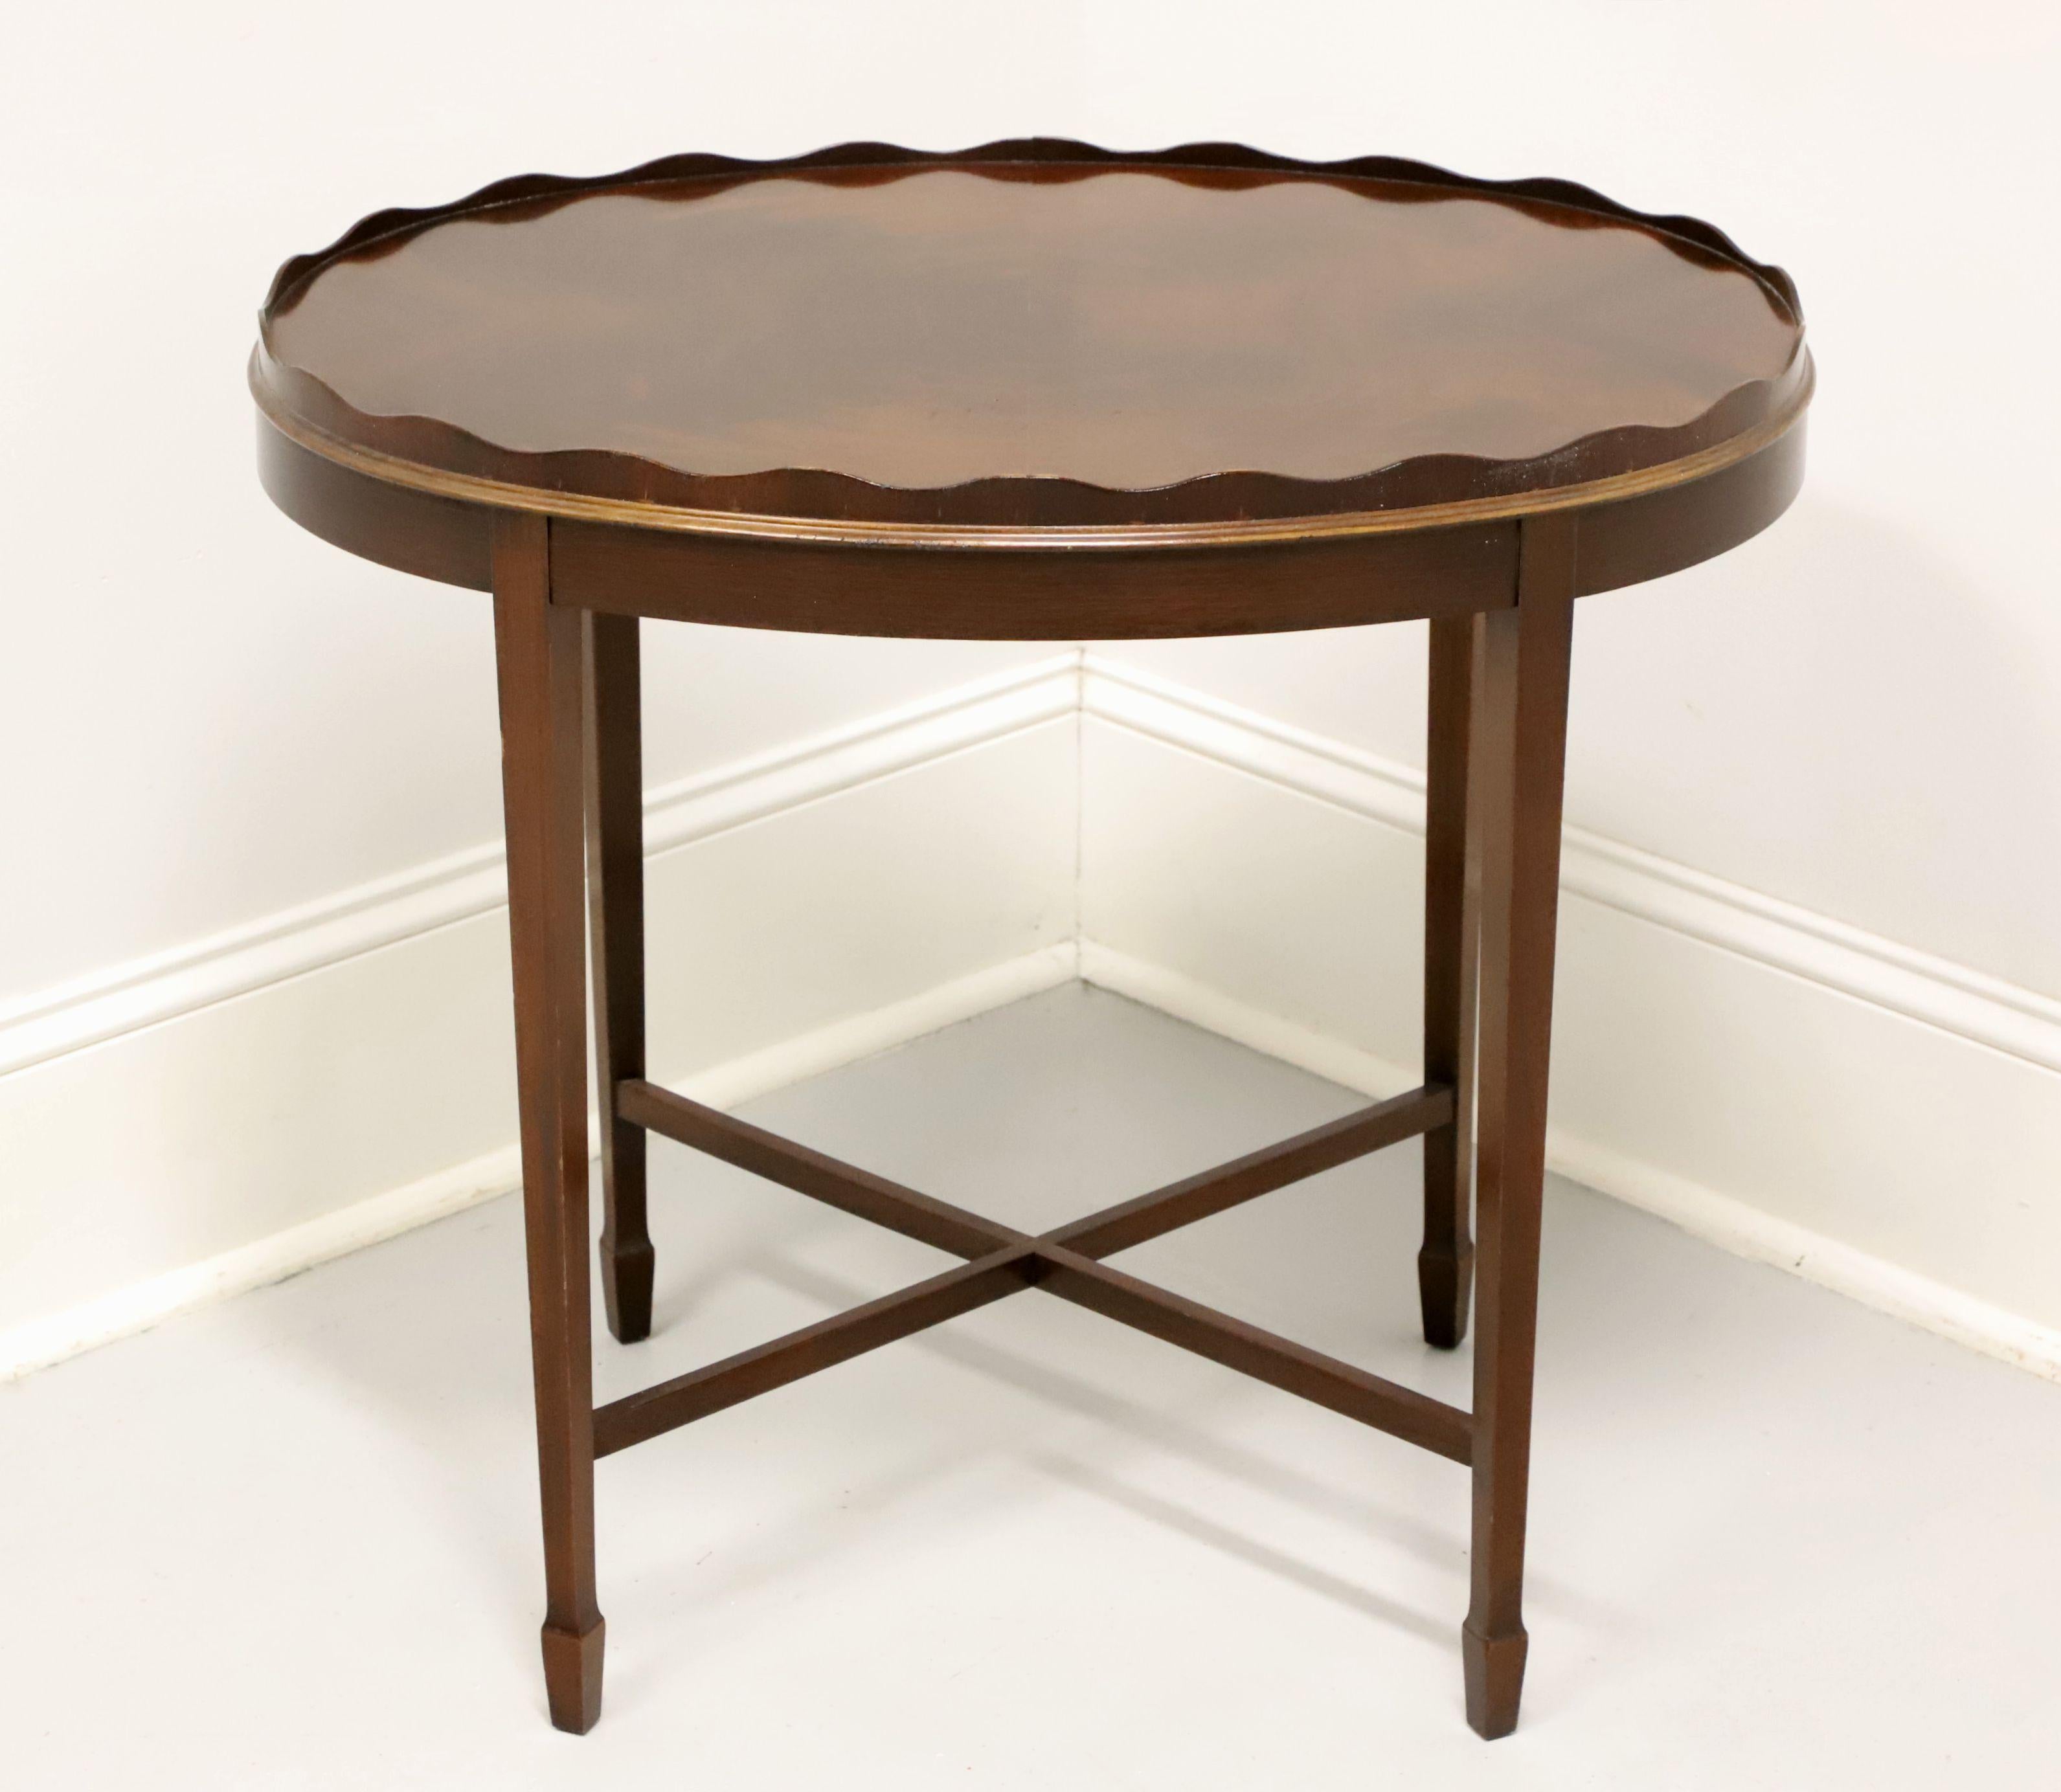 A Traditional style oval side table by Councill Craftsmen. Mahogany with a flame mahogany top, raised scalloped edge, stretchers and tapered straight legs with spade feet. Made in North Carolina, USA, in the late 20th century.

Measures: 20 W 27 D